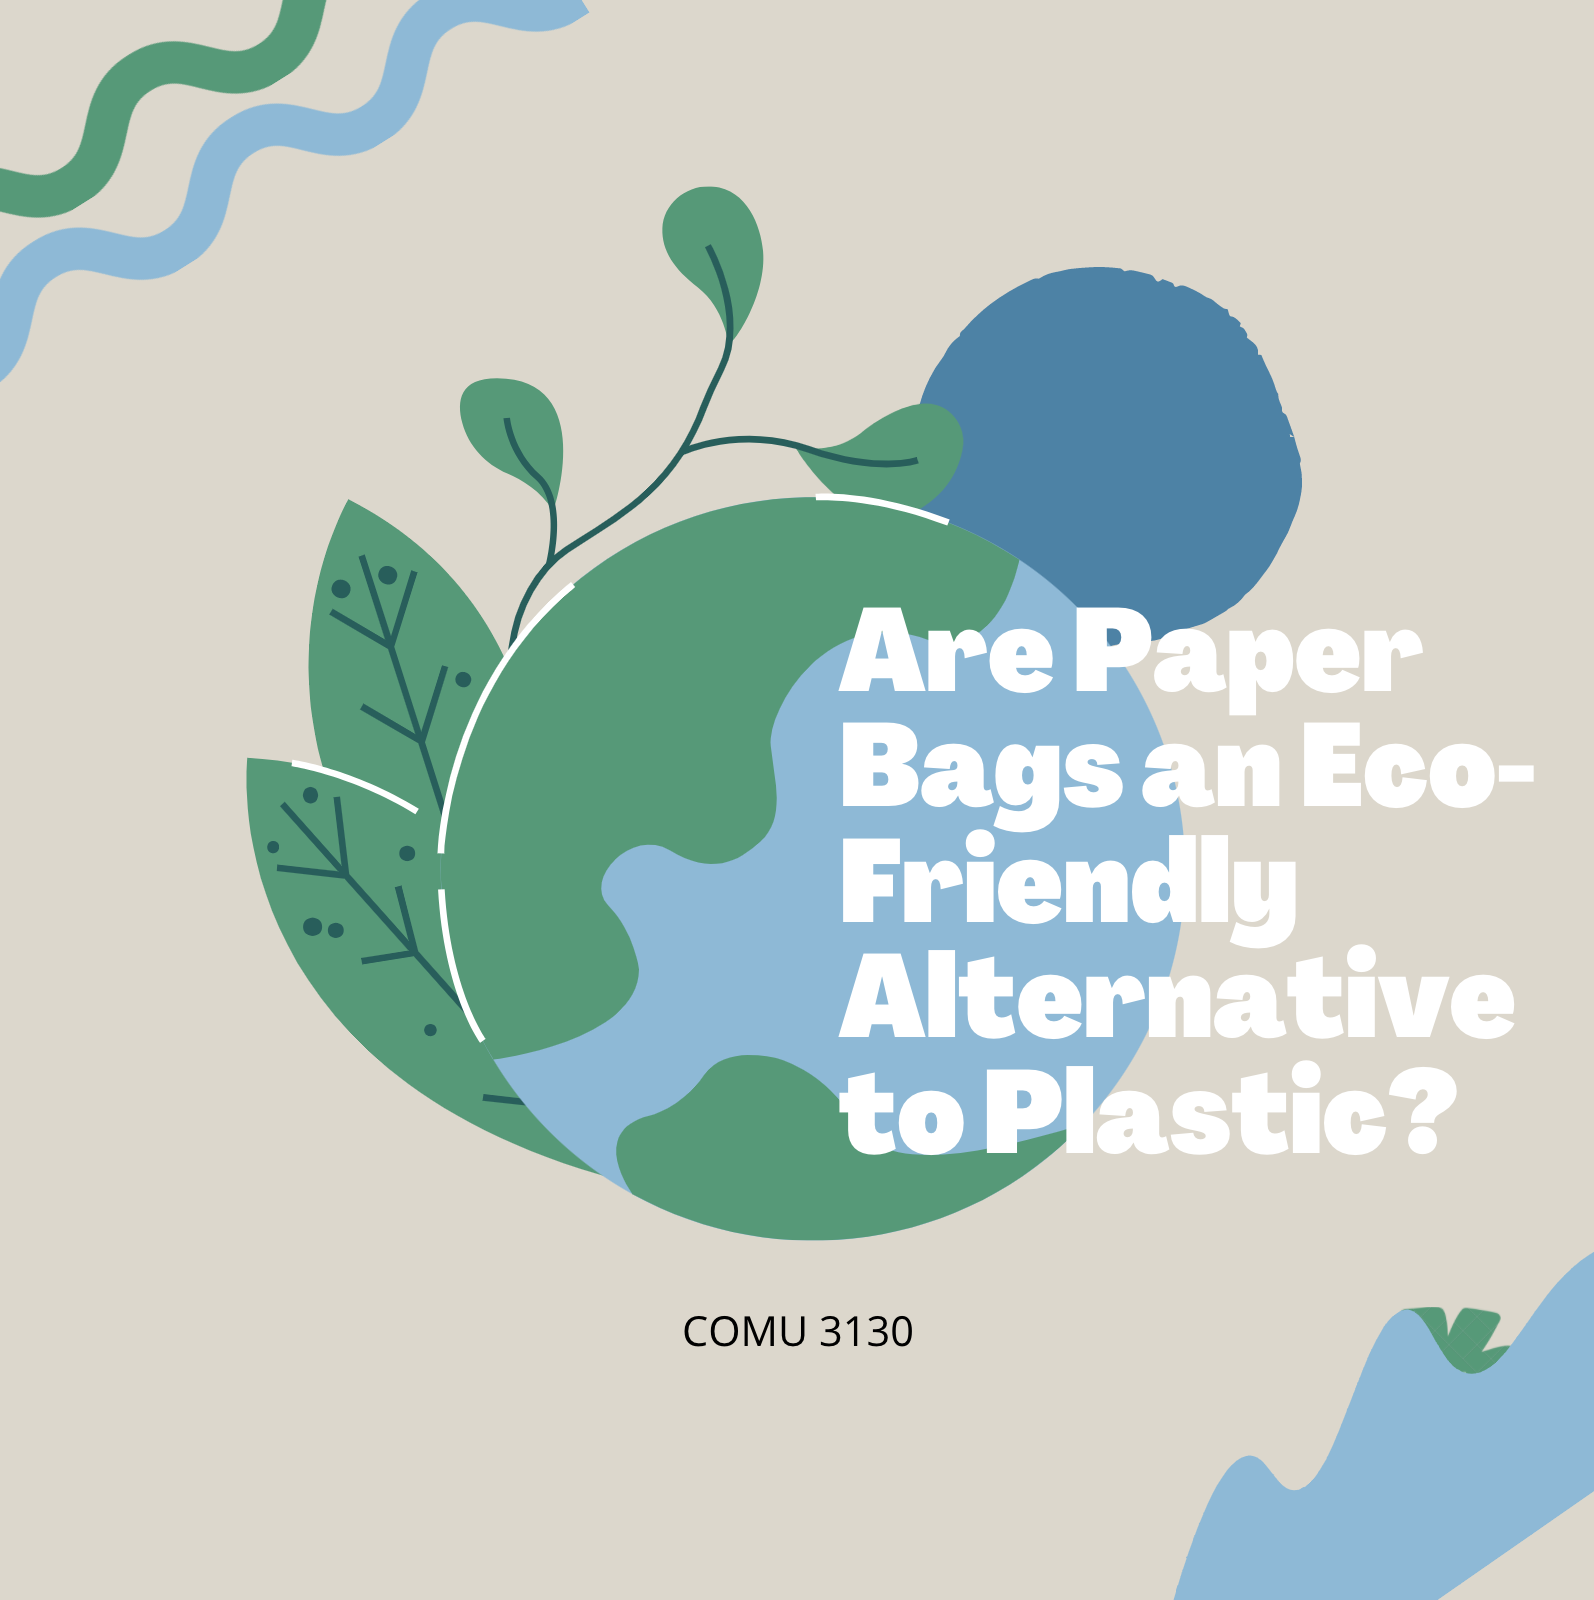 Are Paper Bags an Eco-Friendly Alternative to Plastic?